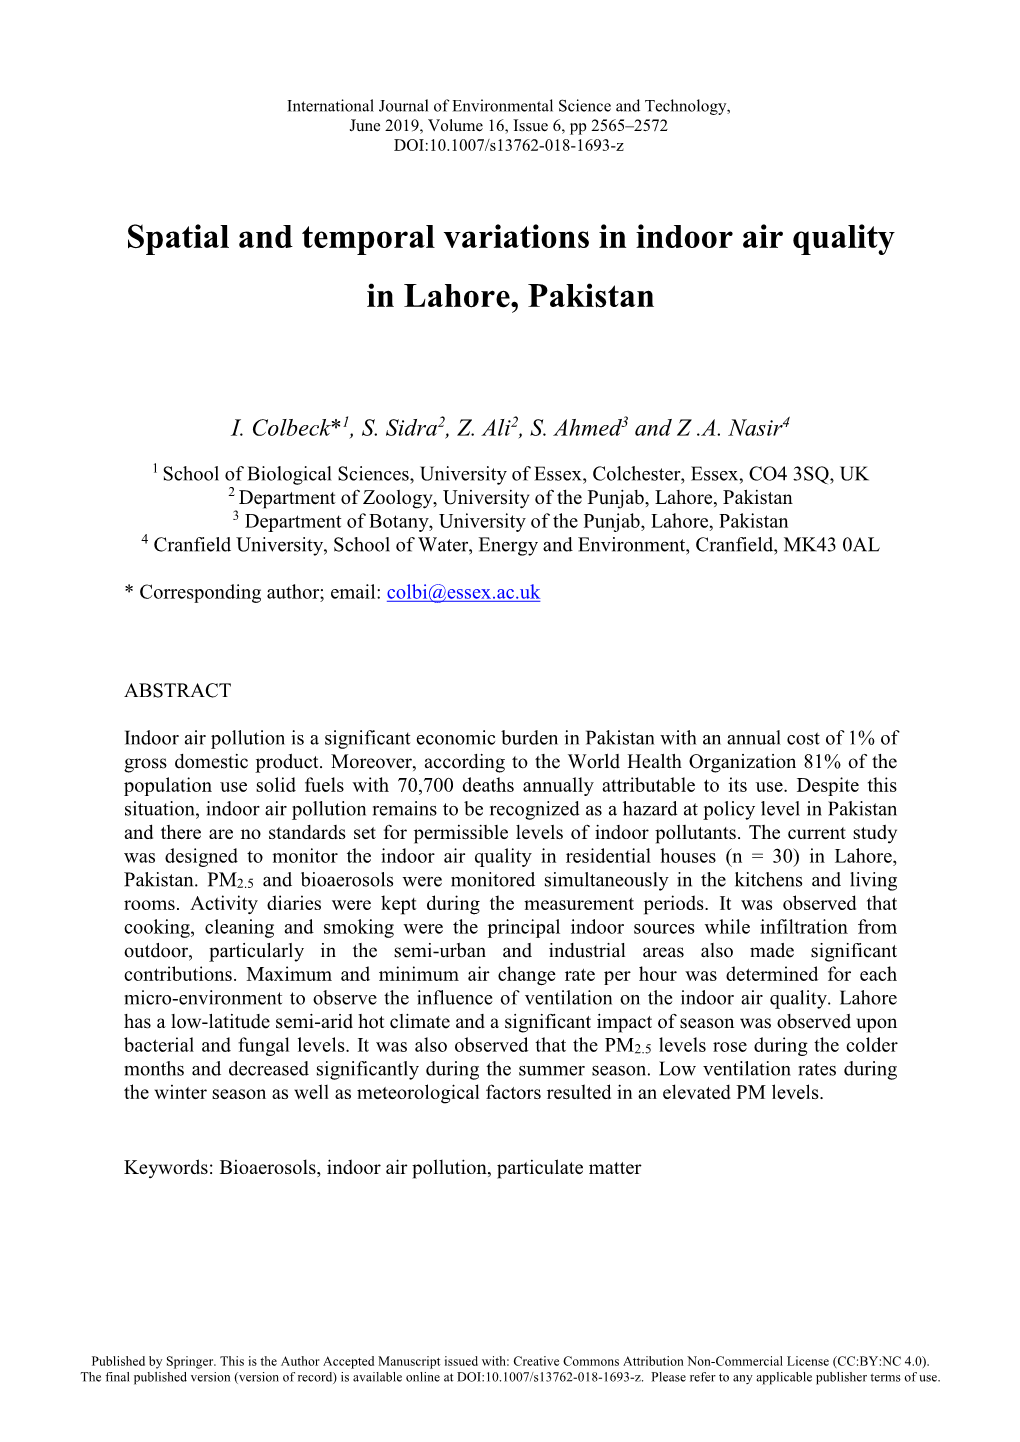 Spatial and Temporal Variations in Indoor Air Quality in Lahore, Pakistan